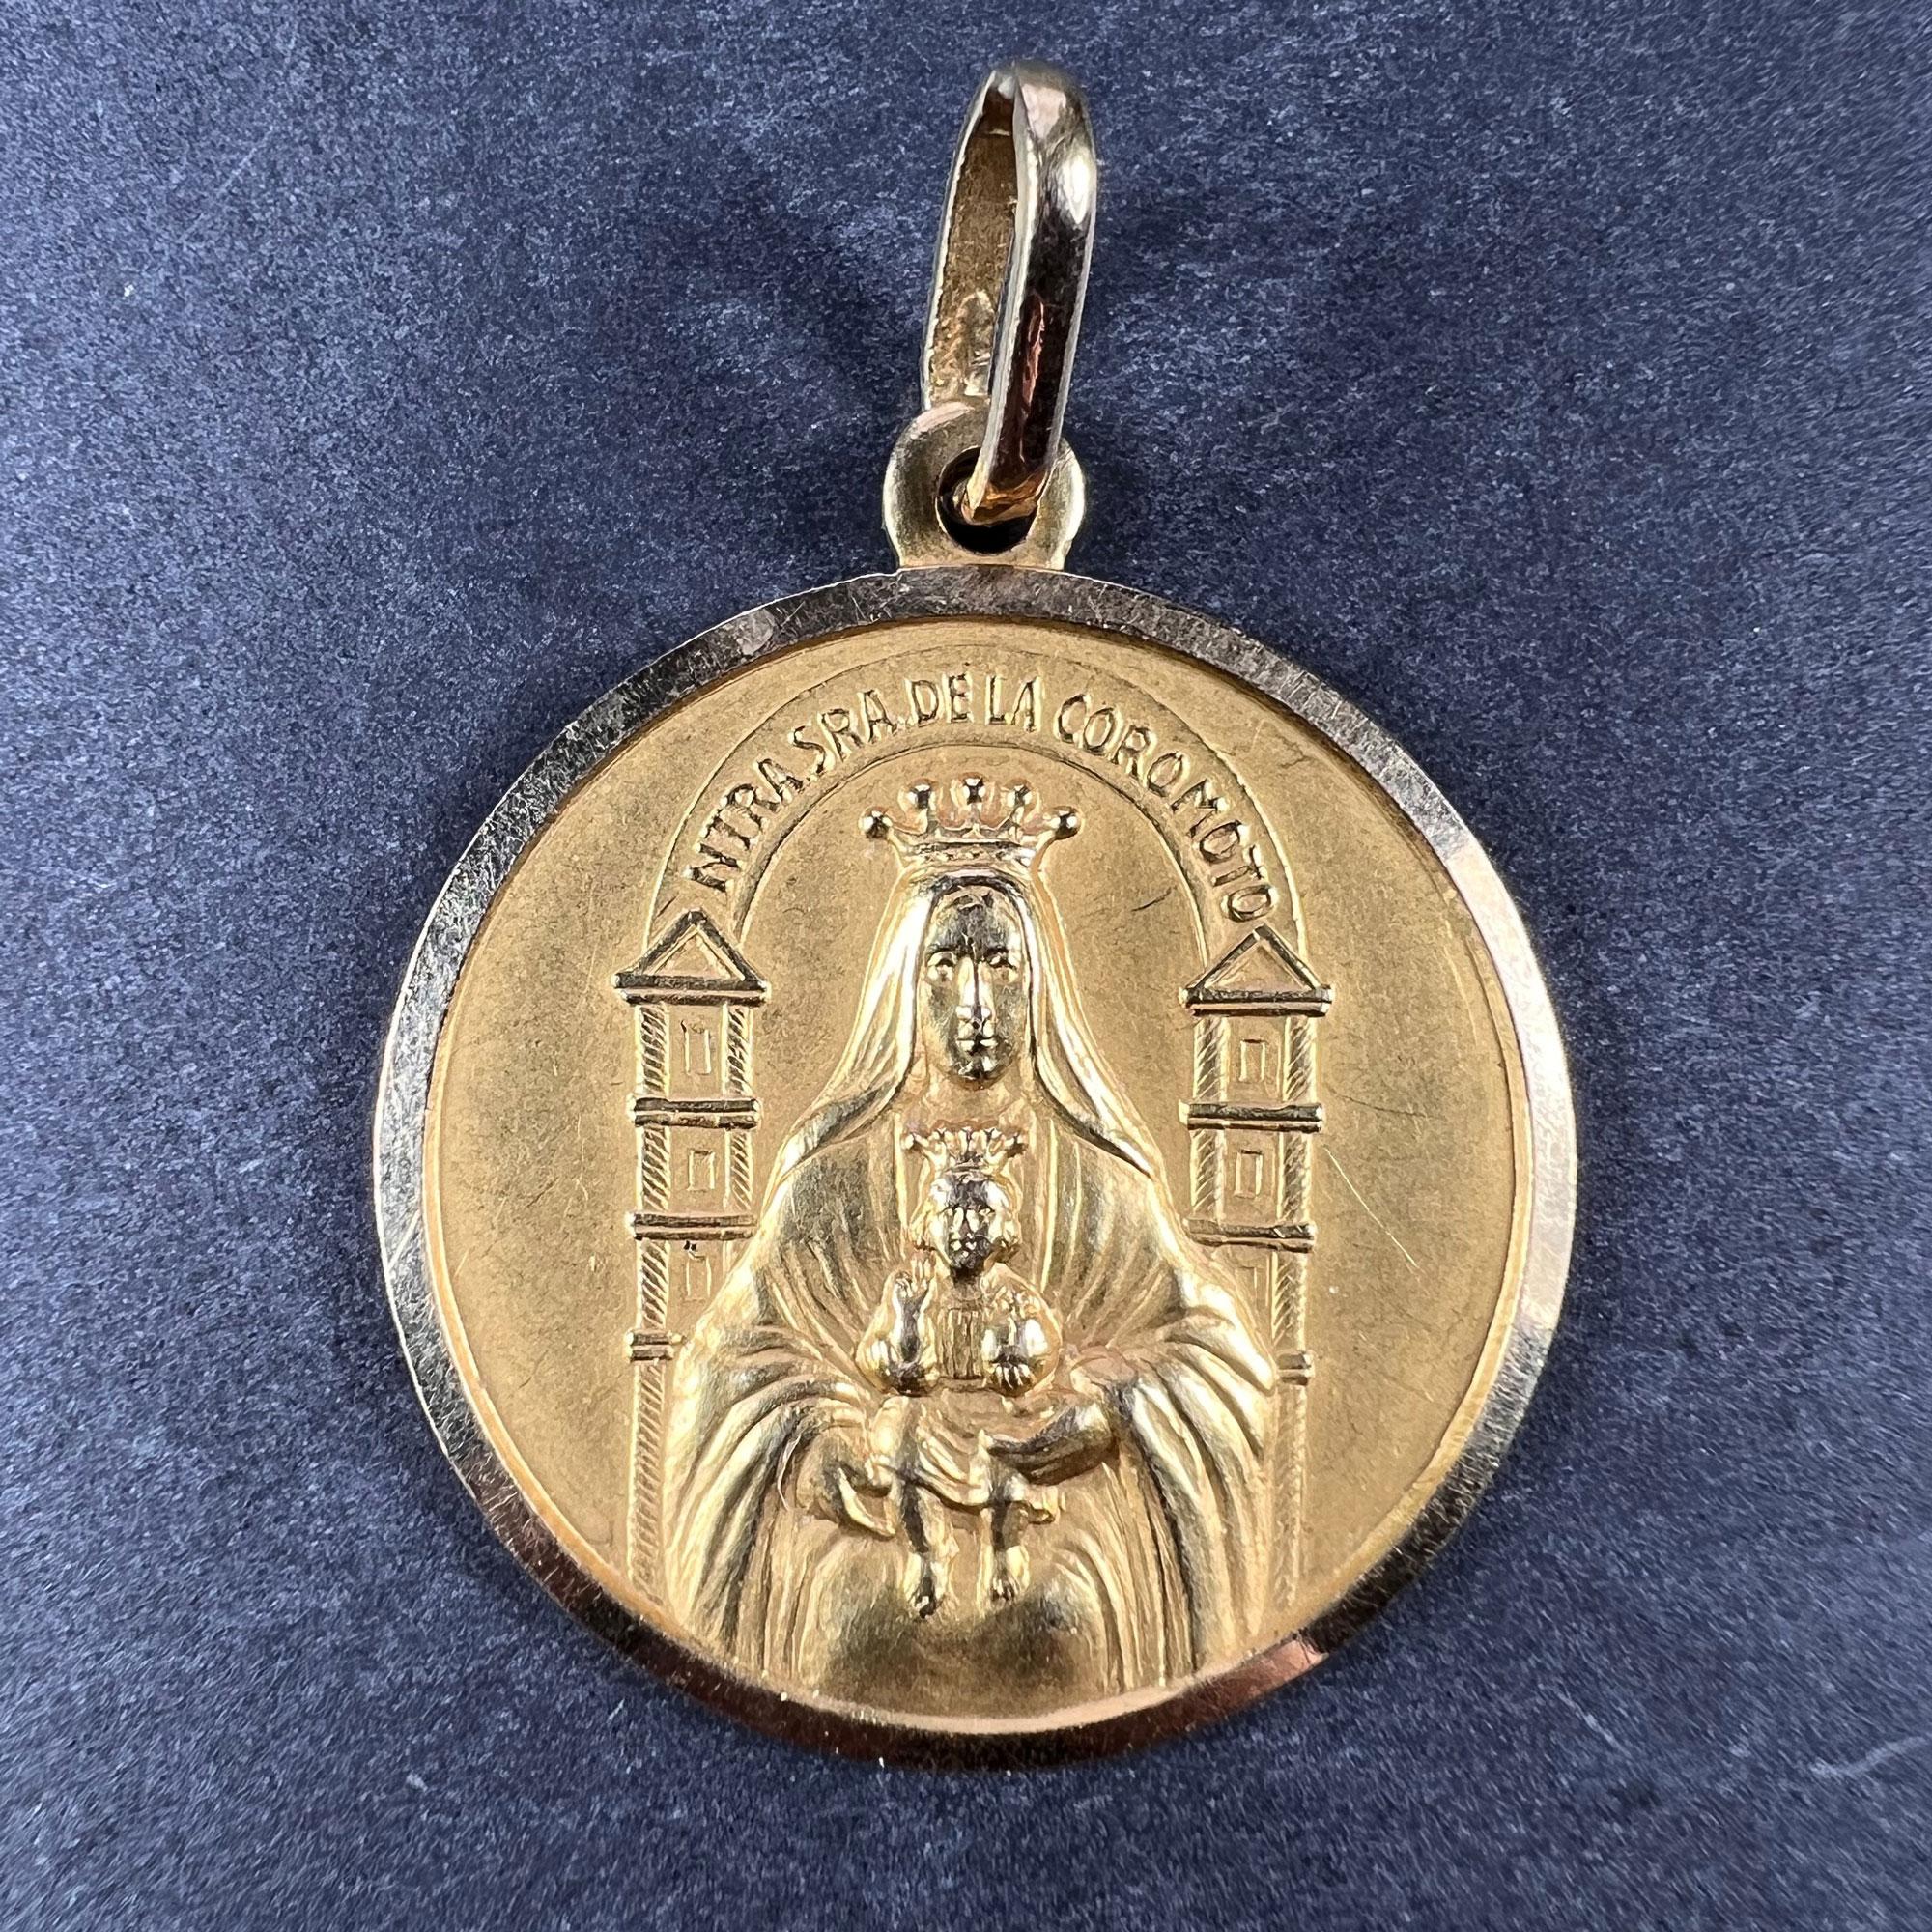 An 18 karat (18K) yellow gold pendant designed as a medal depicting the Madonna and Child in front of the Basilica of the National Shrine of our lady of Coromoto in Venezuela, topped by the phrase 'NTRA SRA DE LA COROMOTO' (Our Lady of Coromoto).